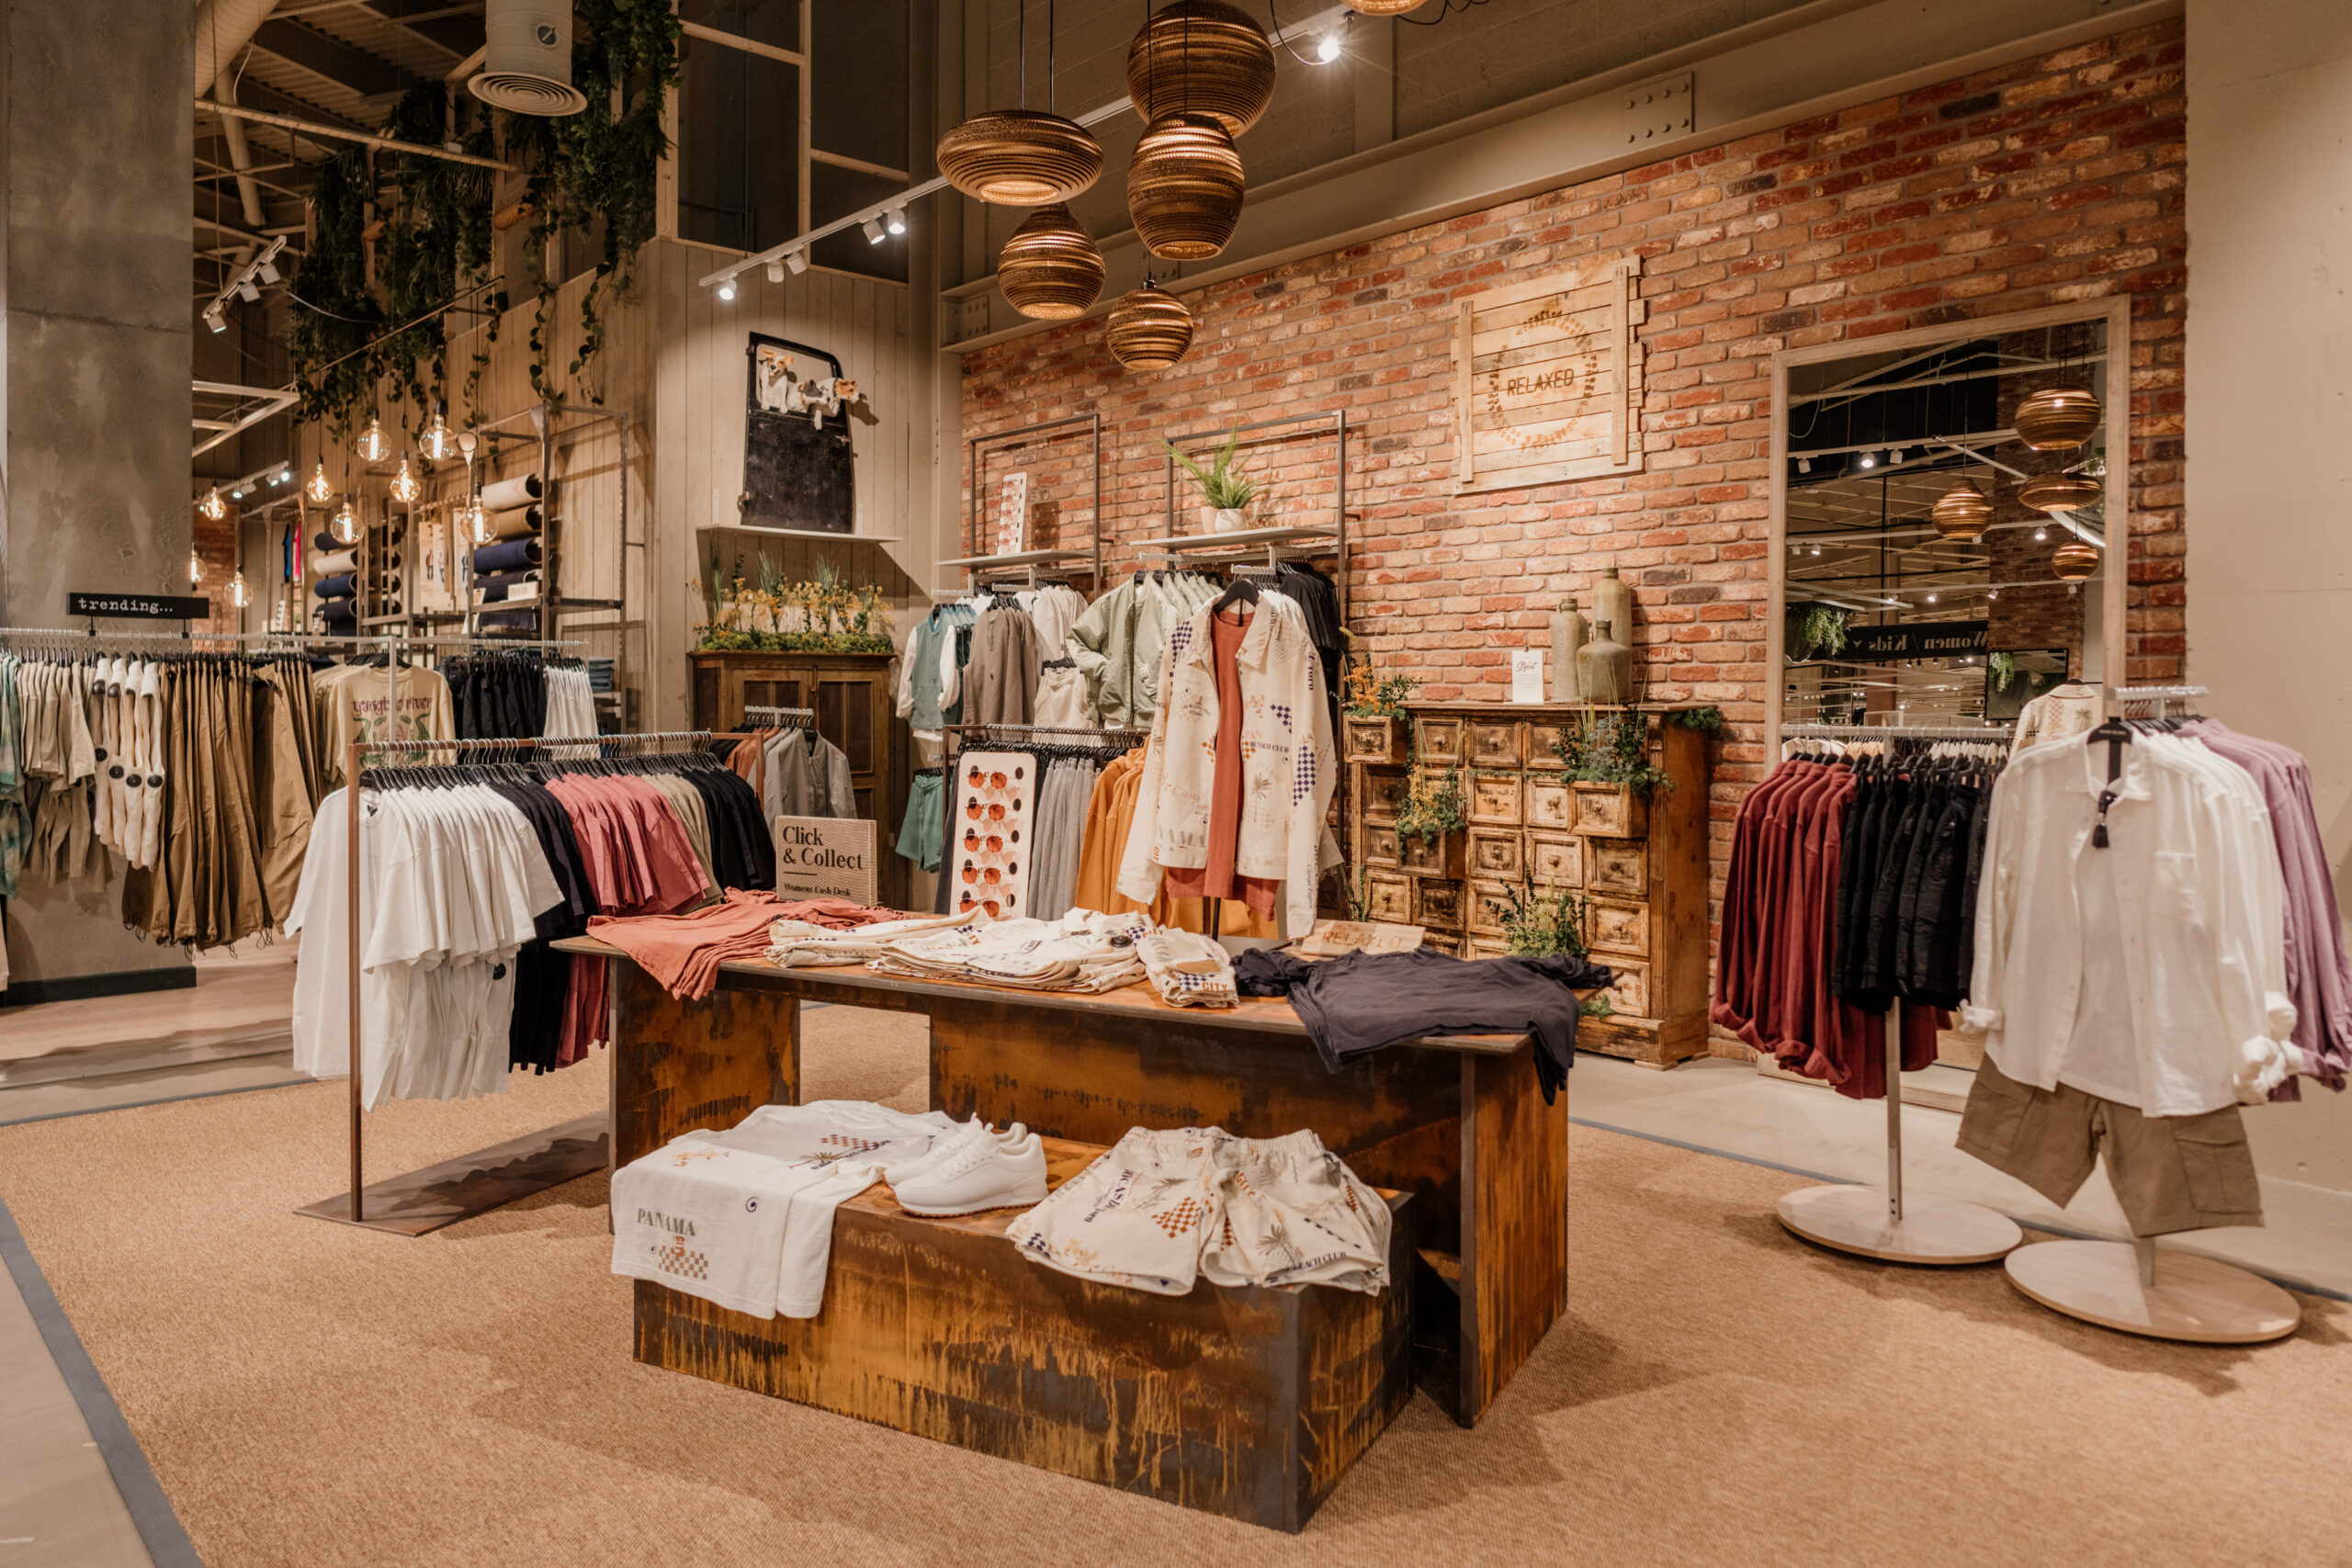 In pictures: River Island opens Trafford Centre concept store